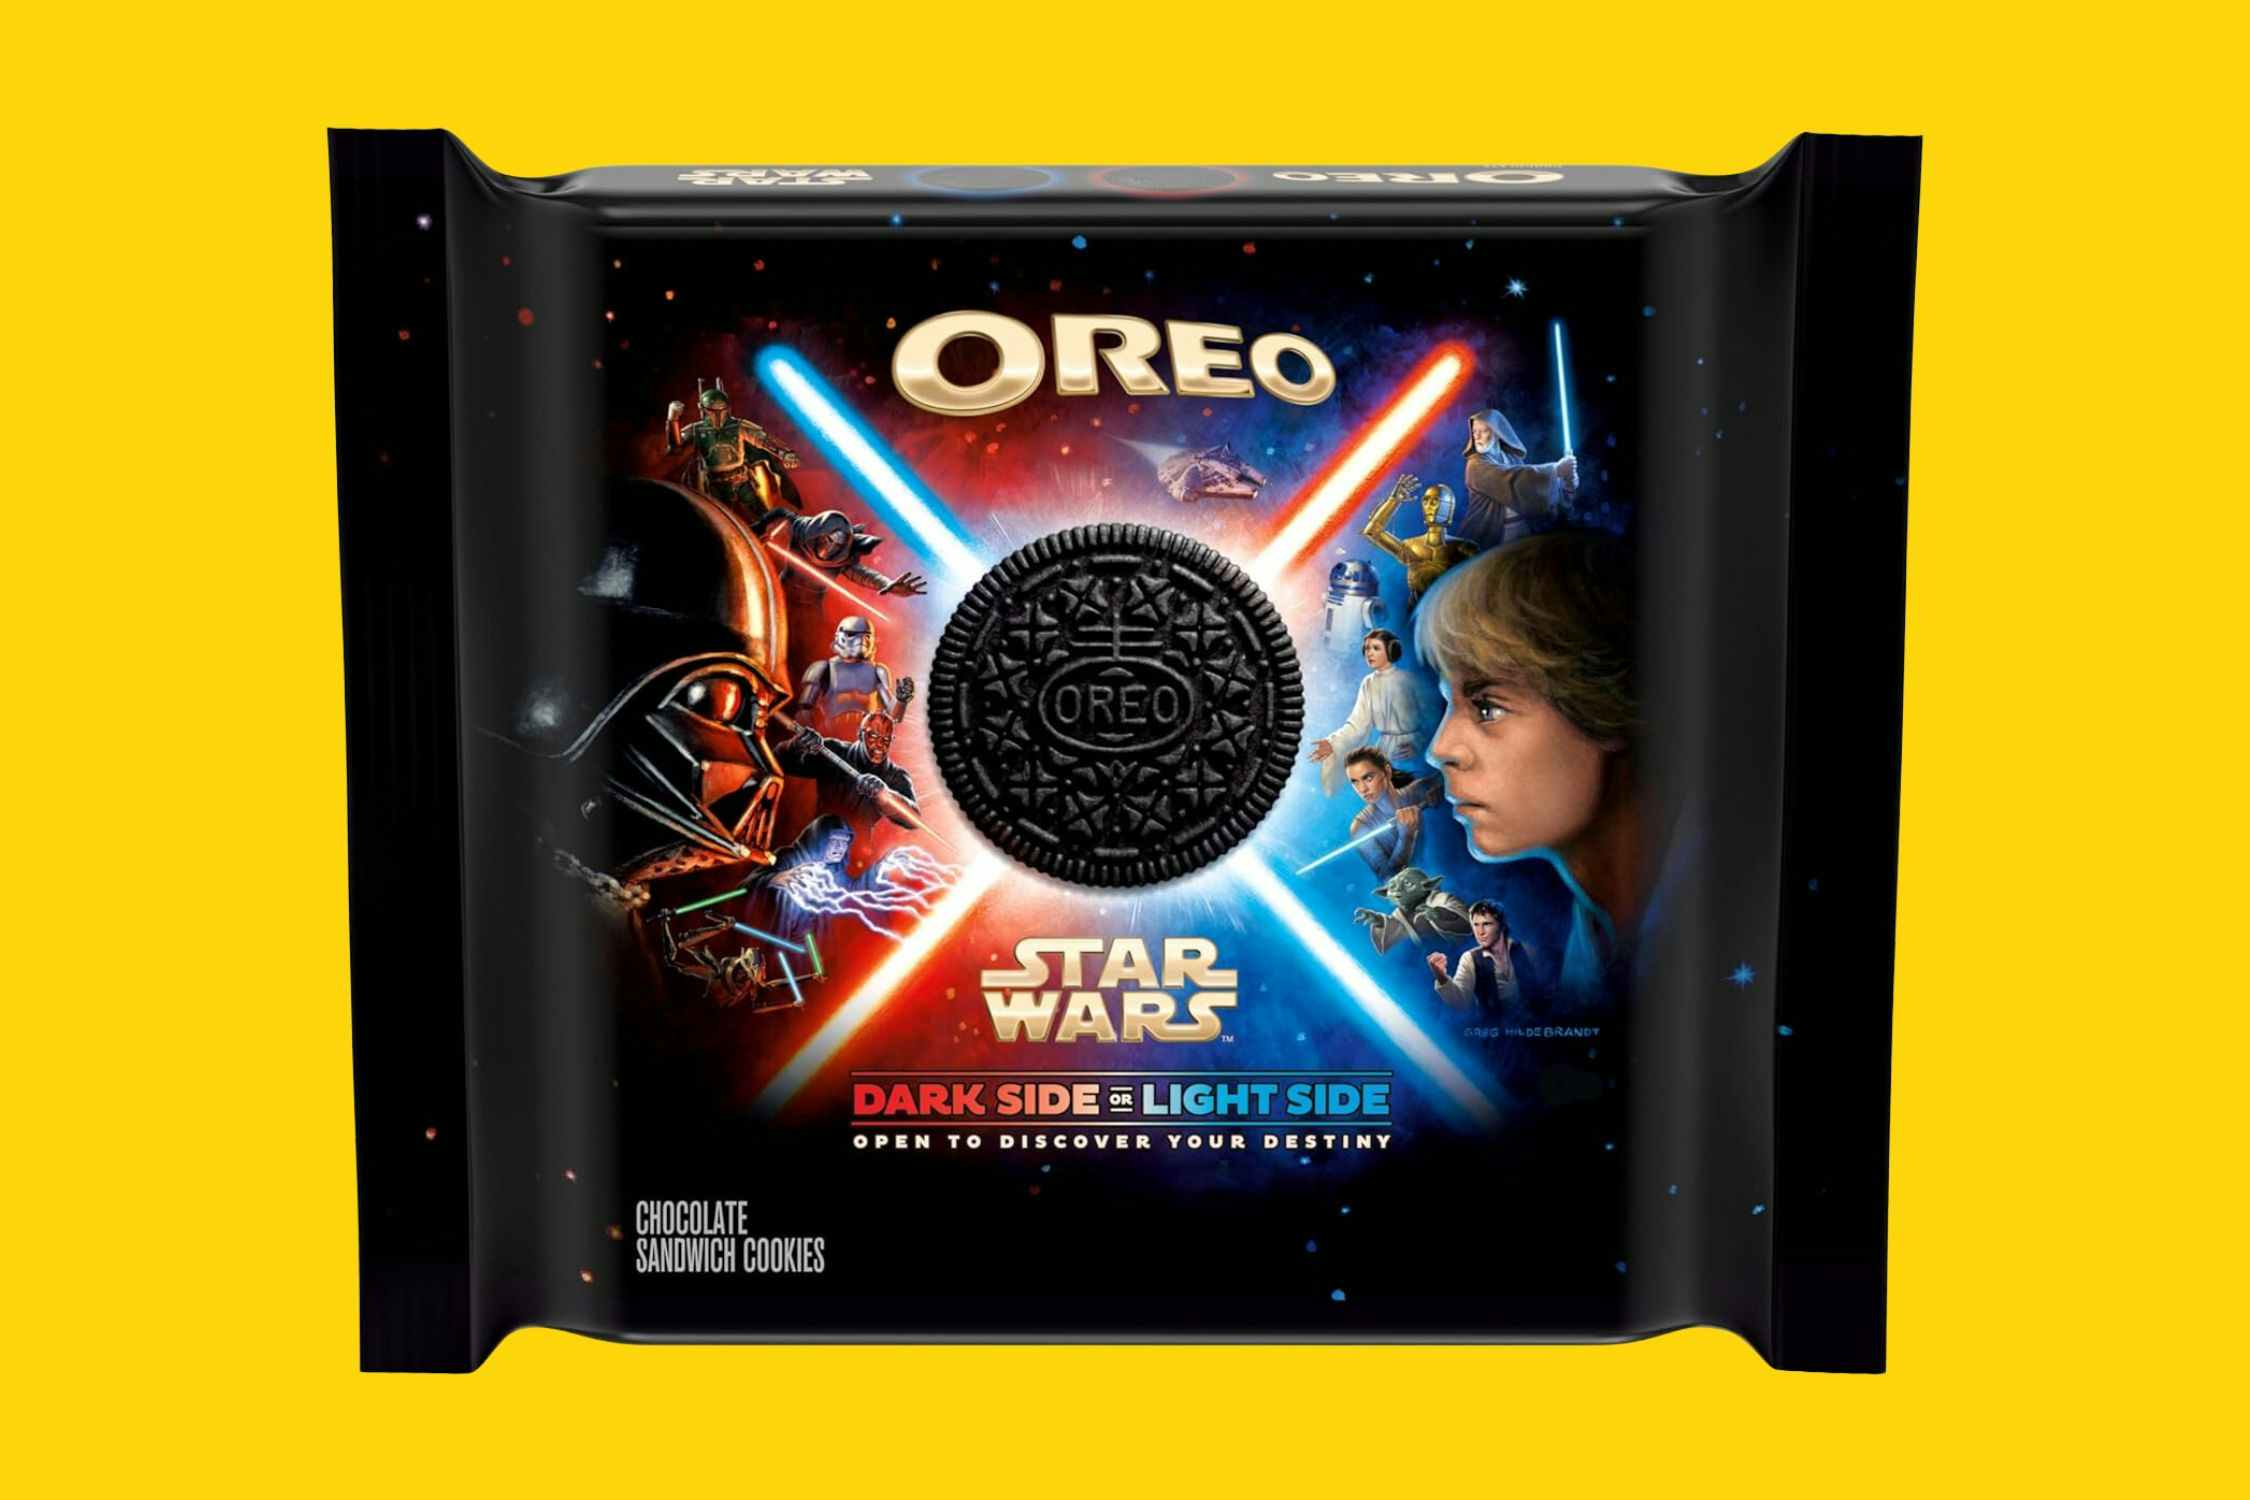 Star Wars Oreo Cookies, as Low as $4.28 on Amazon